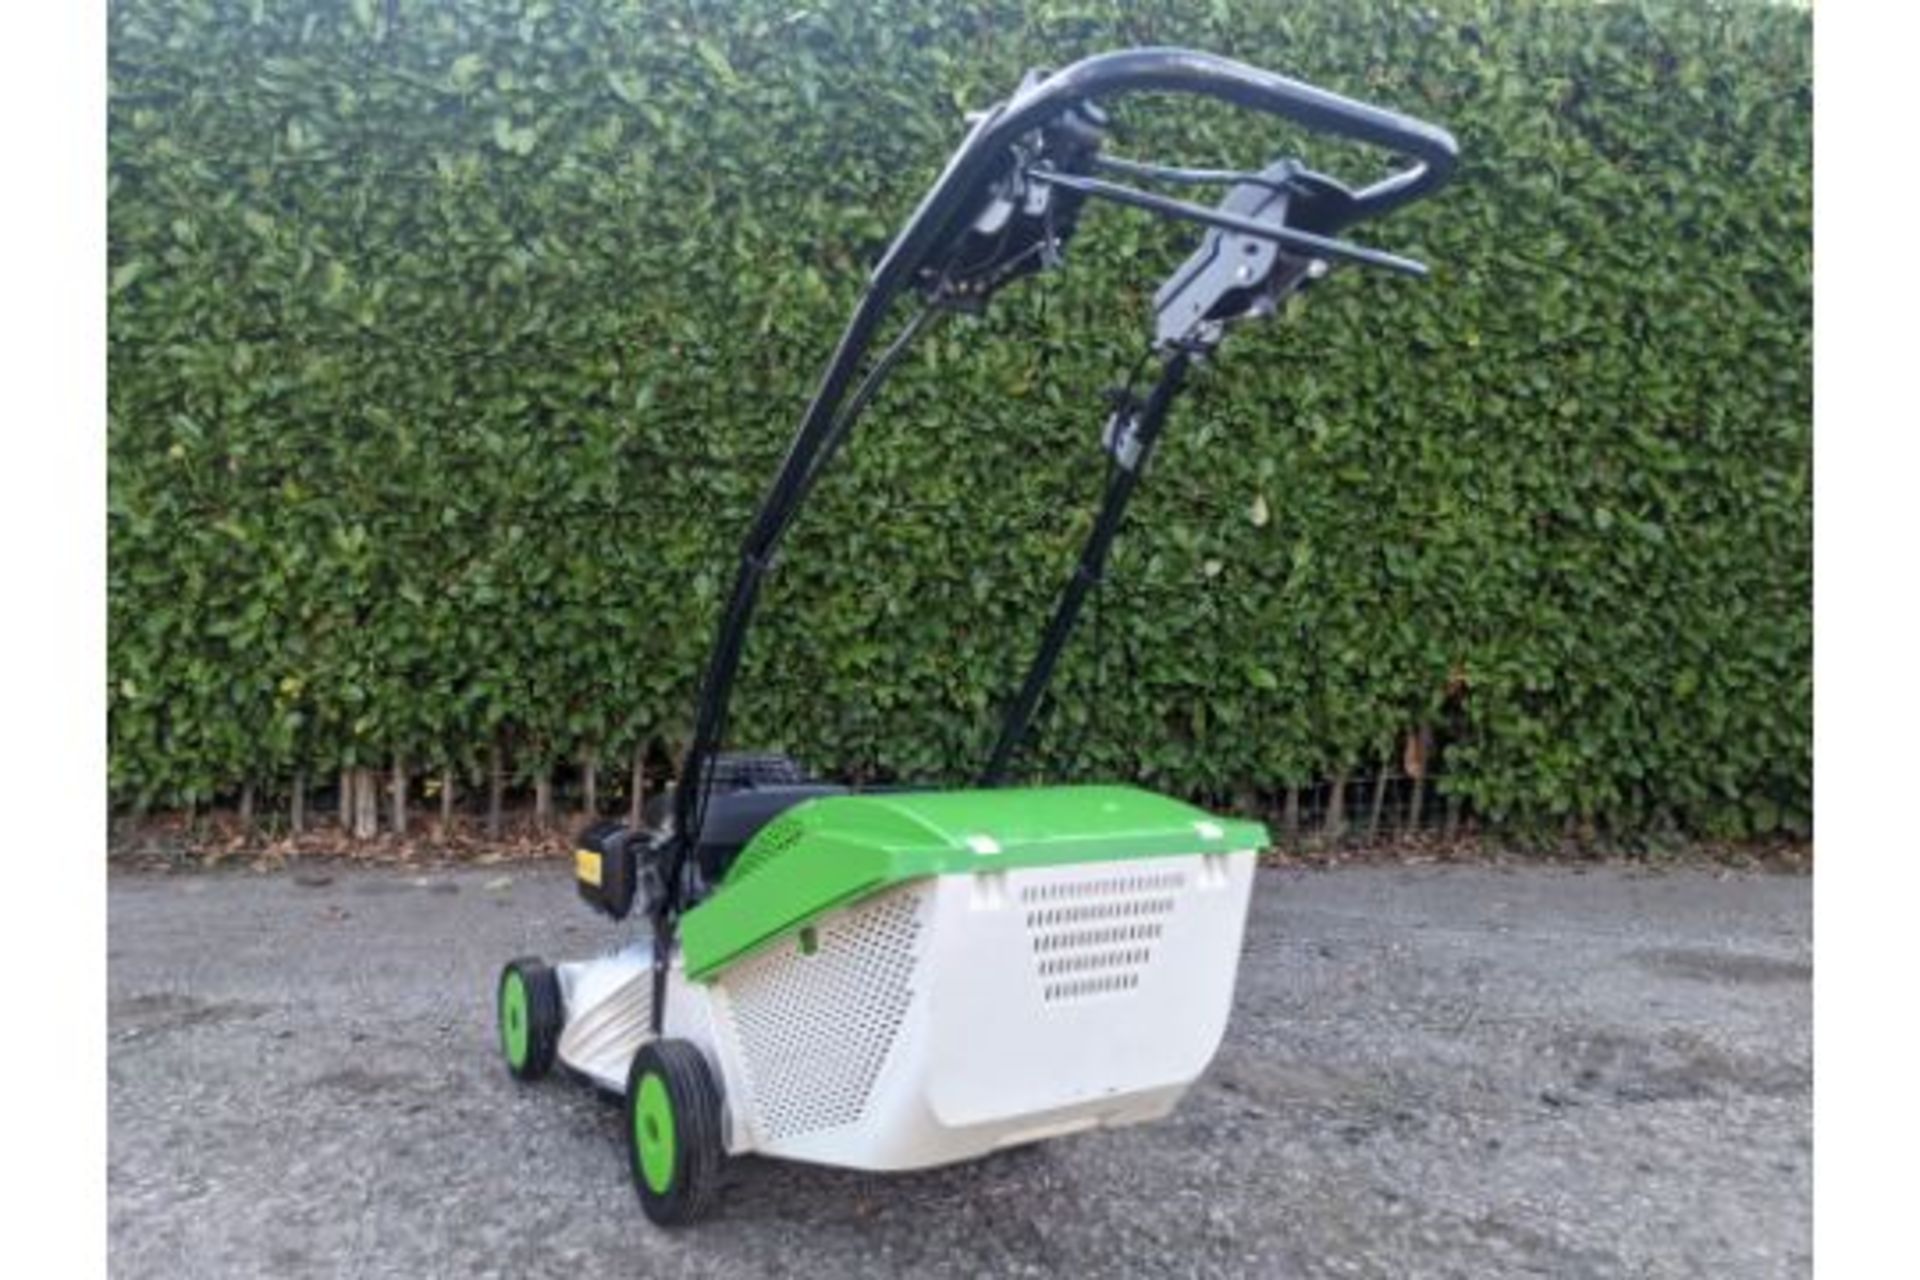 2019 Etesia Pro 46 PHCT 18" Self Propelled Lawn Mower - Image 4 of 5